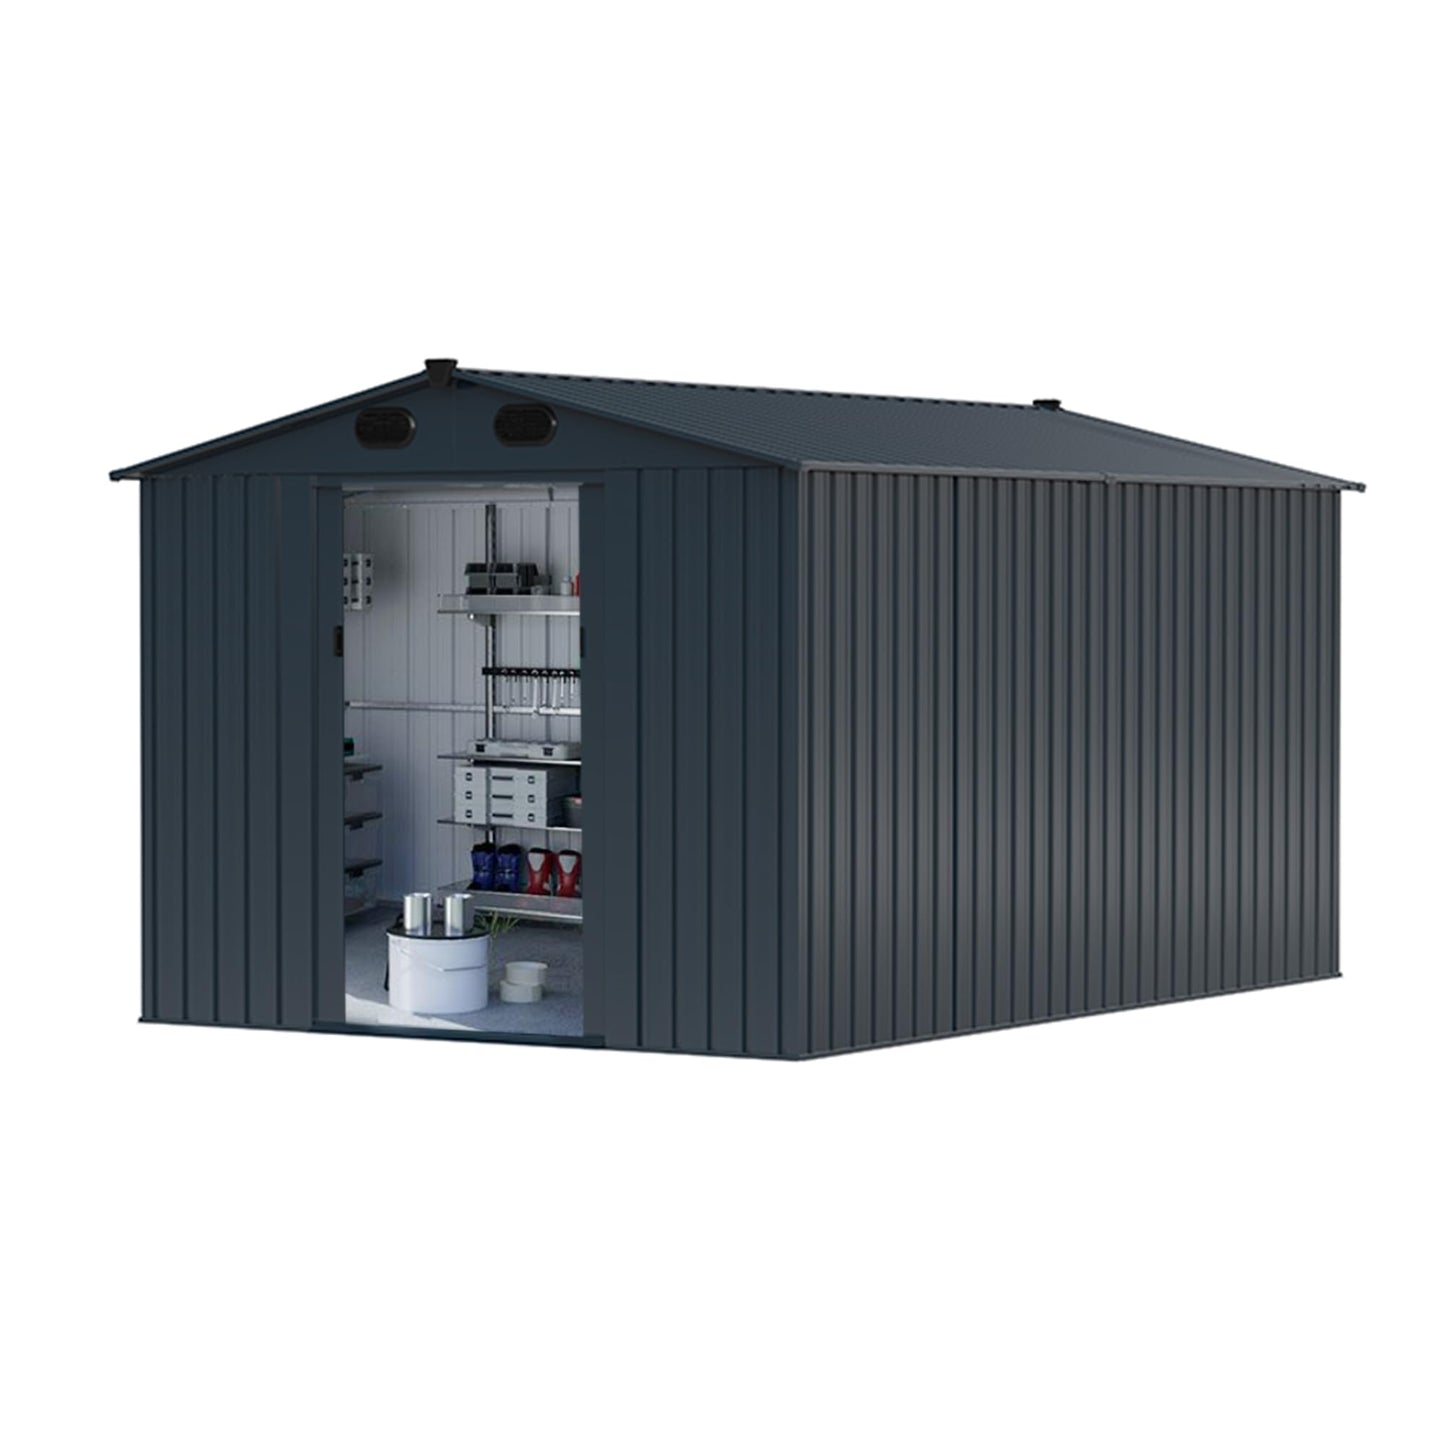 Chery Industrial 8'x12' Outdoor Storage Shed Galvanized Steel, Garden Shed with 4 Vents & Double Sliding Door, Utility Tool Shed Storage House for Backyard, Patio, Lawn(Dark Cool Grey) 8x12(Dark Cold Grey)